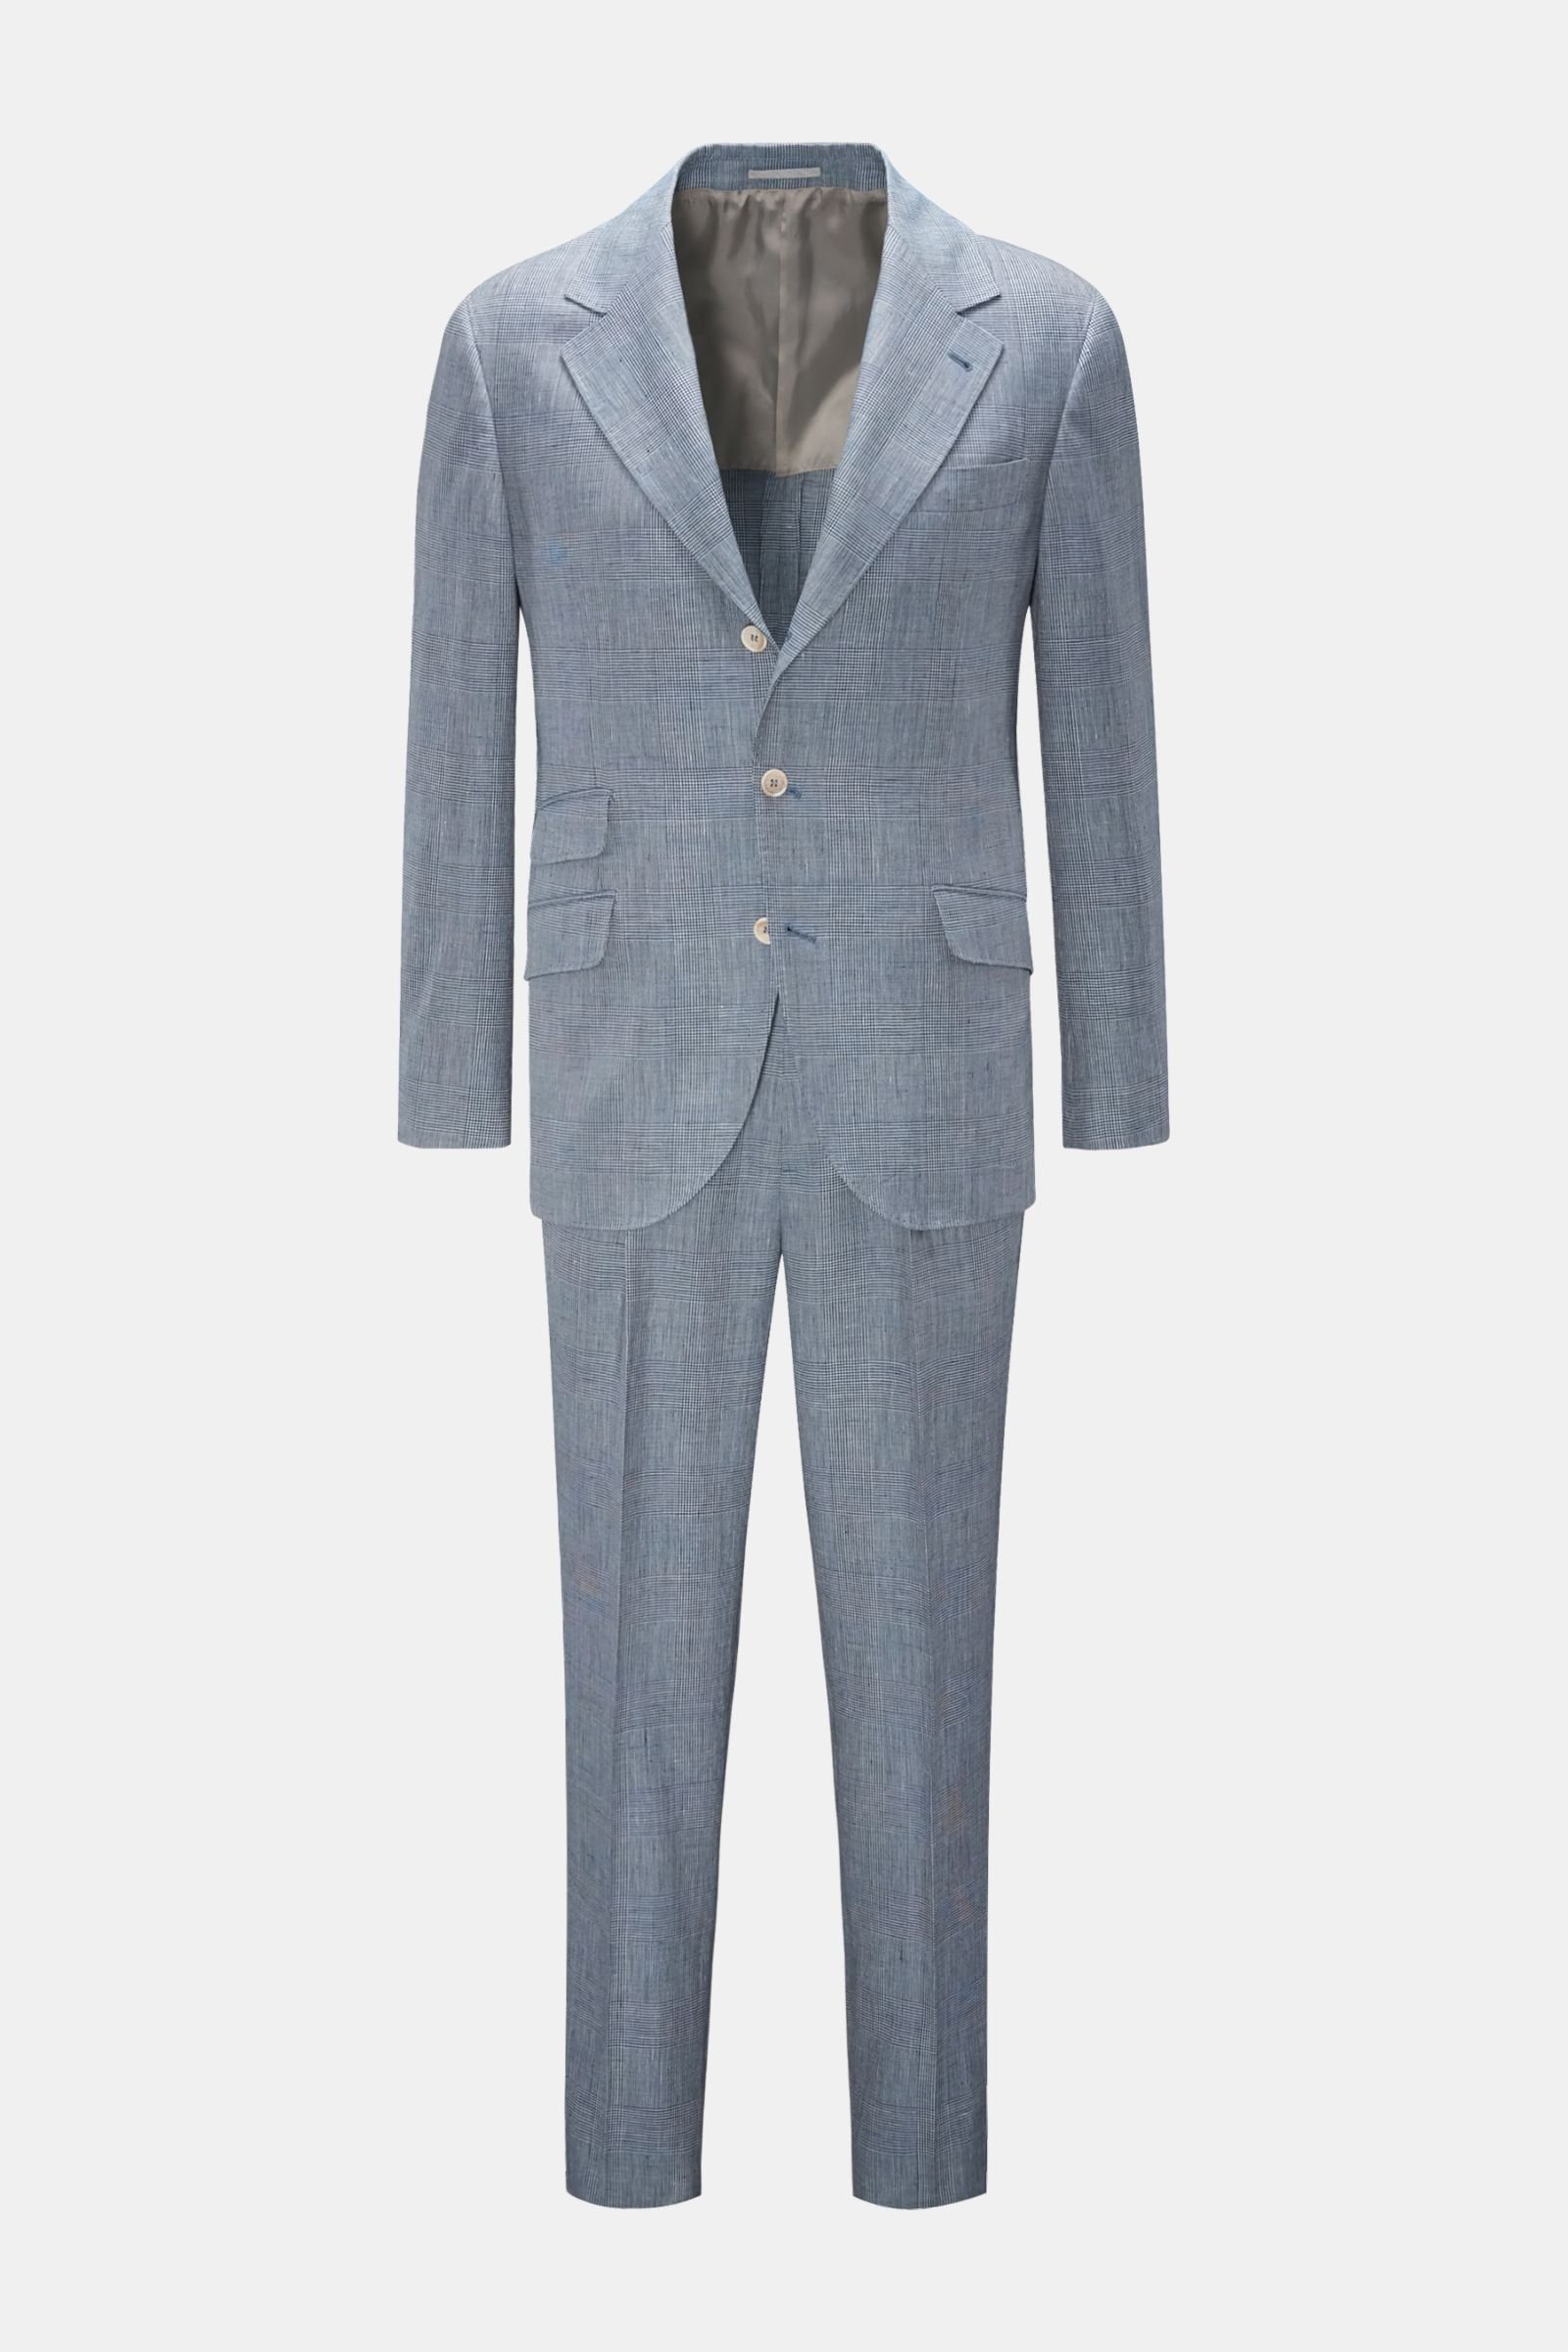 Suit grey-blue/white checked